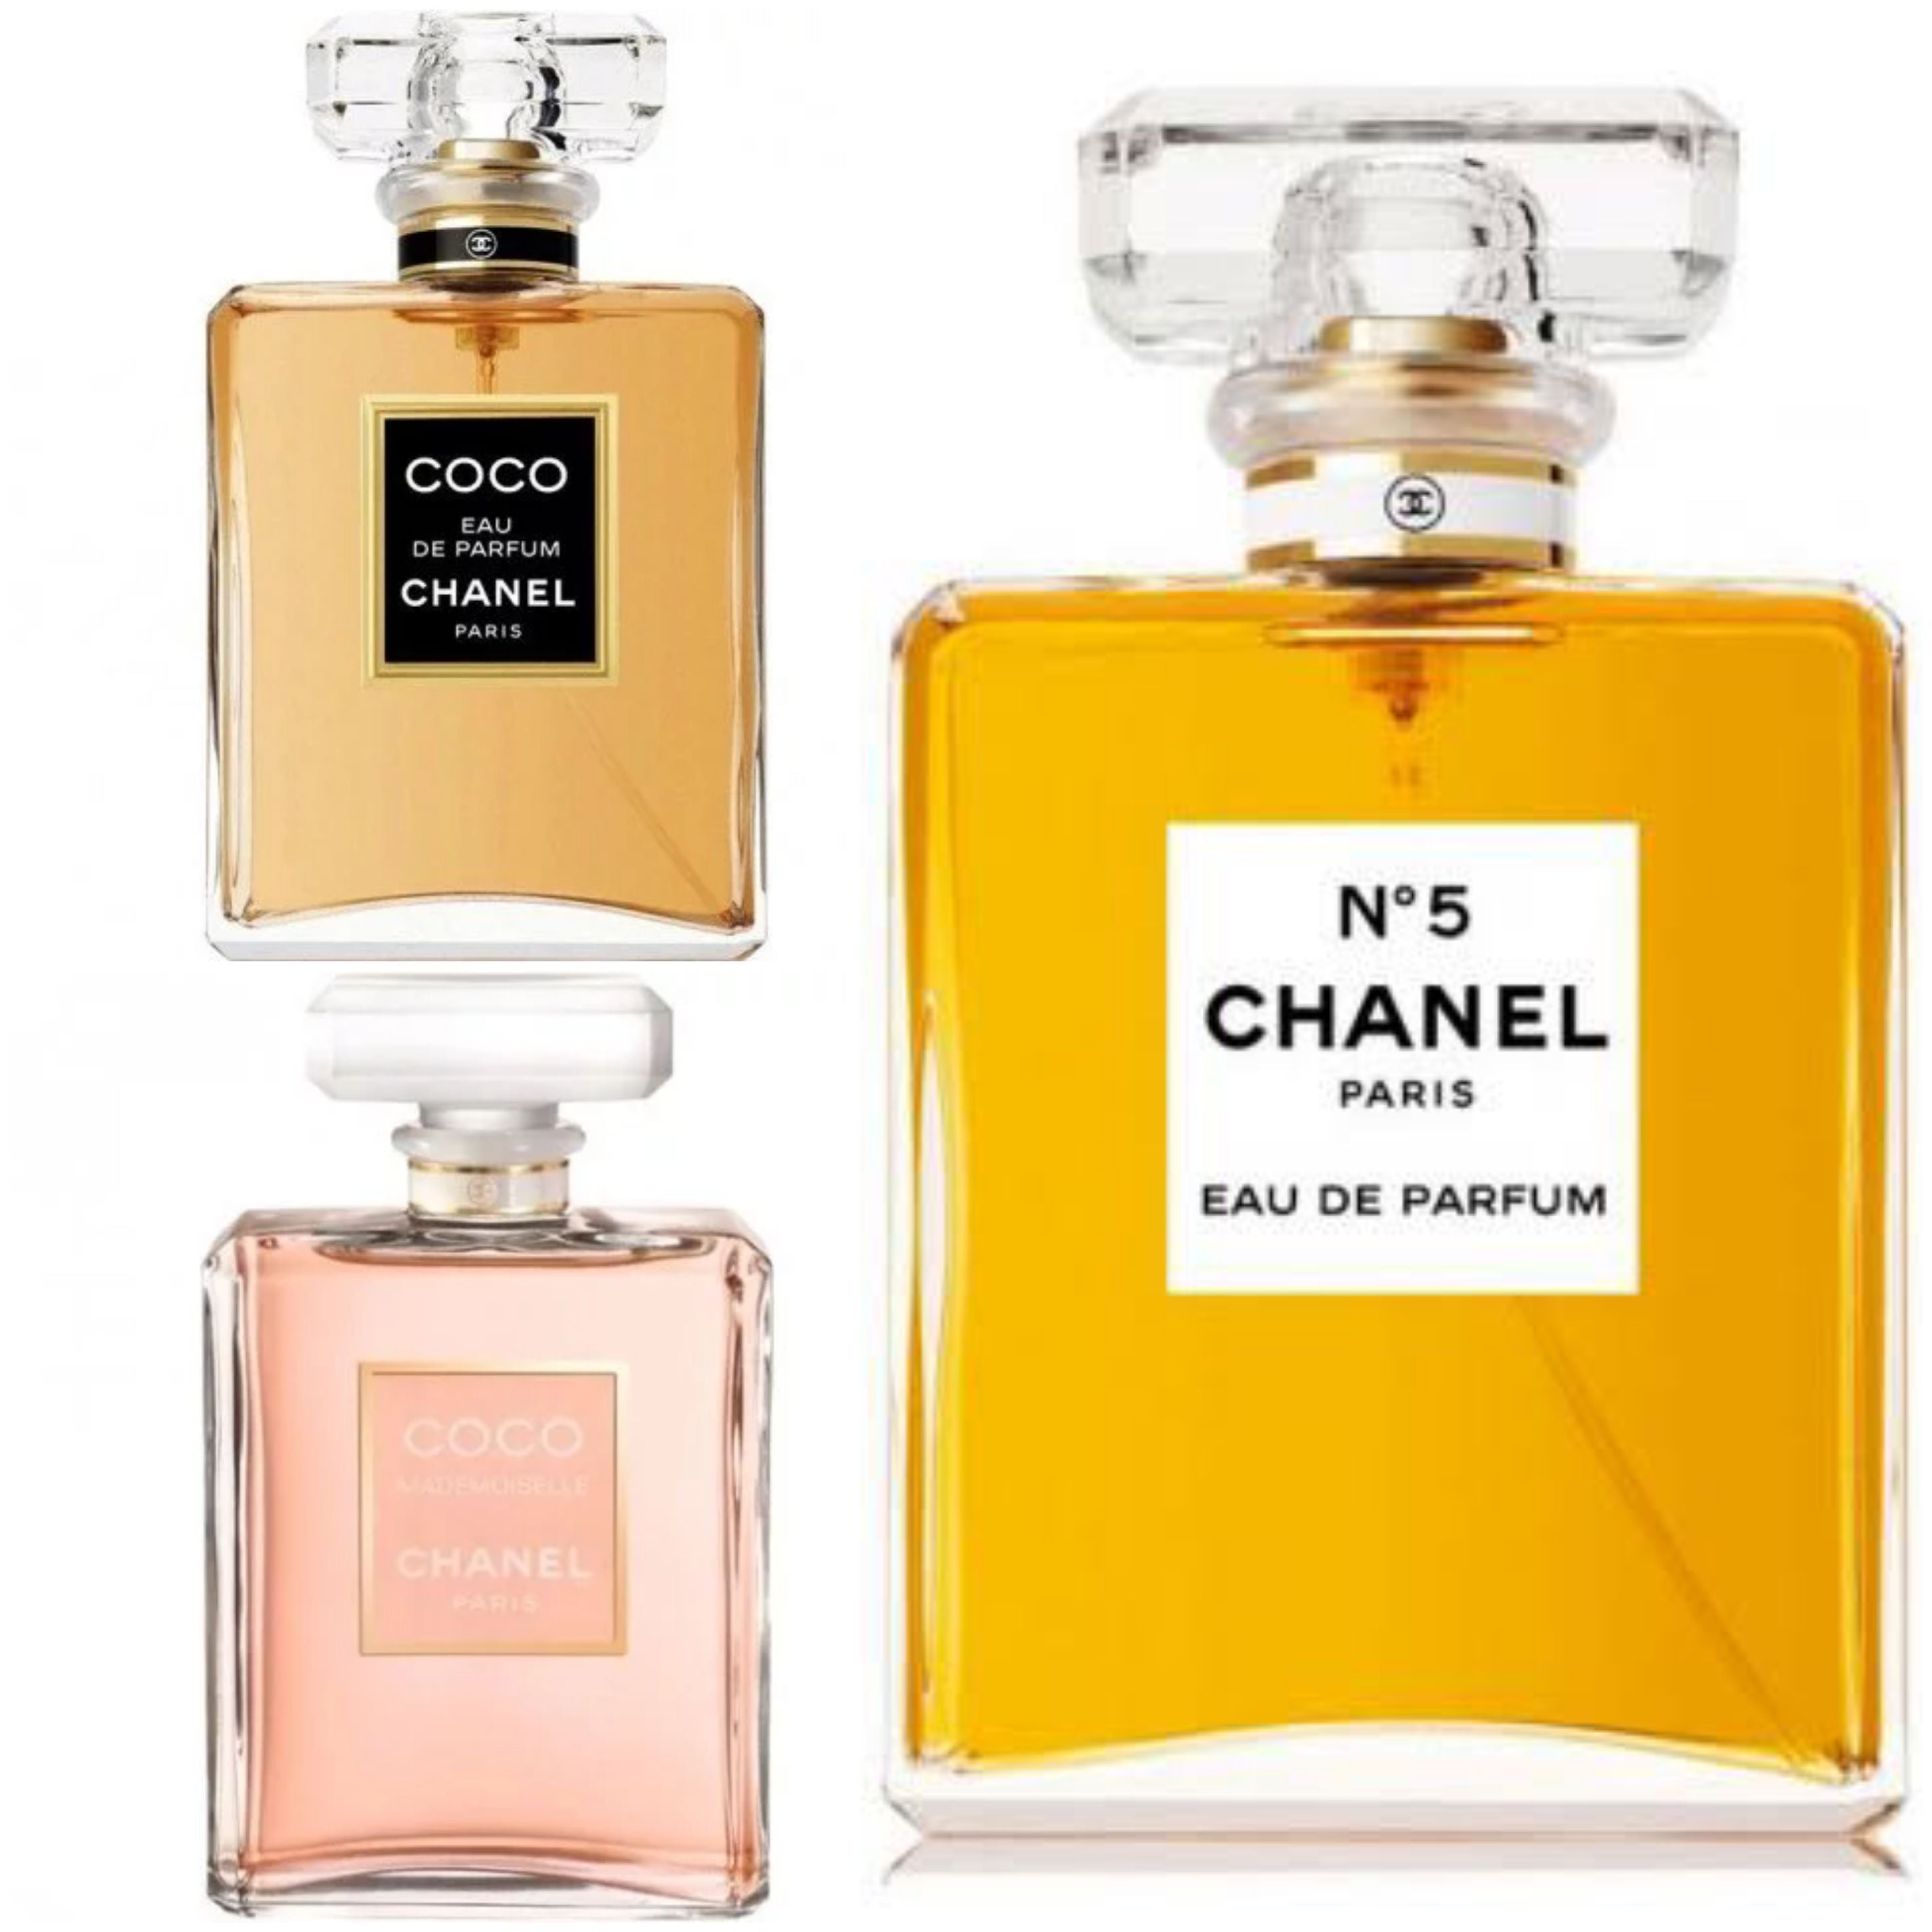 Shop for samples of Coco (Eau de Parfum) by Chanel for women rebottled and  repacked by